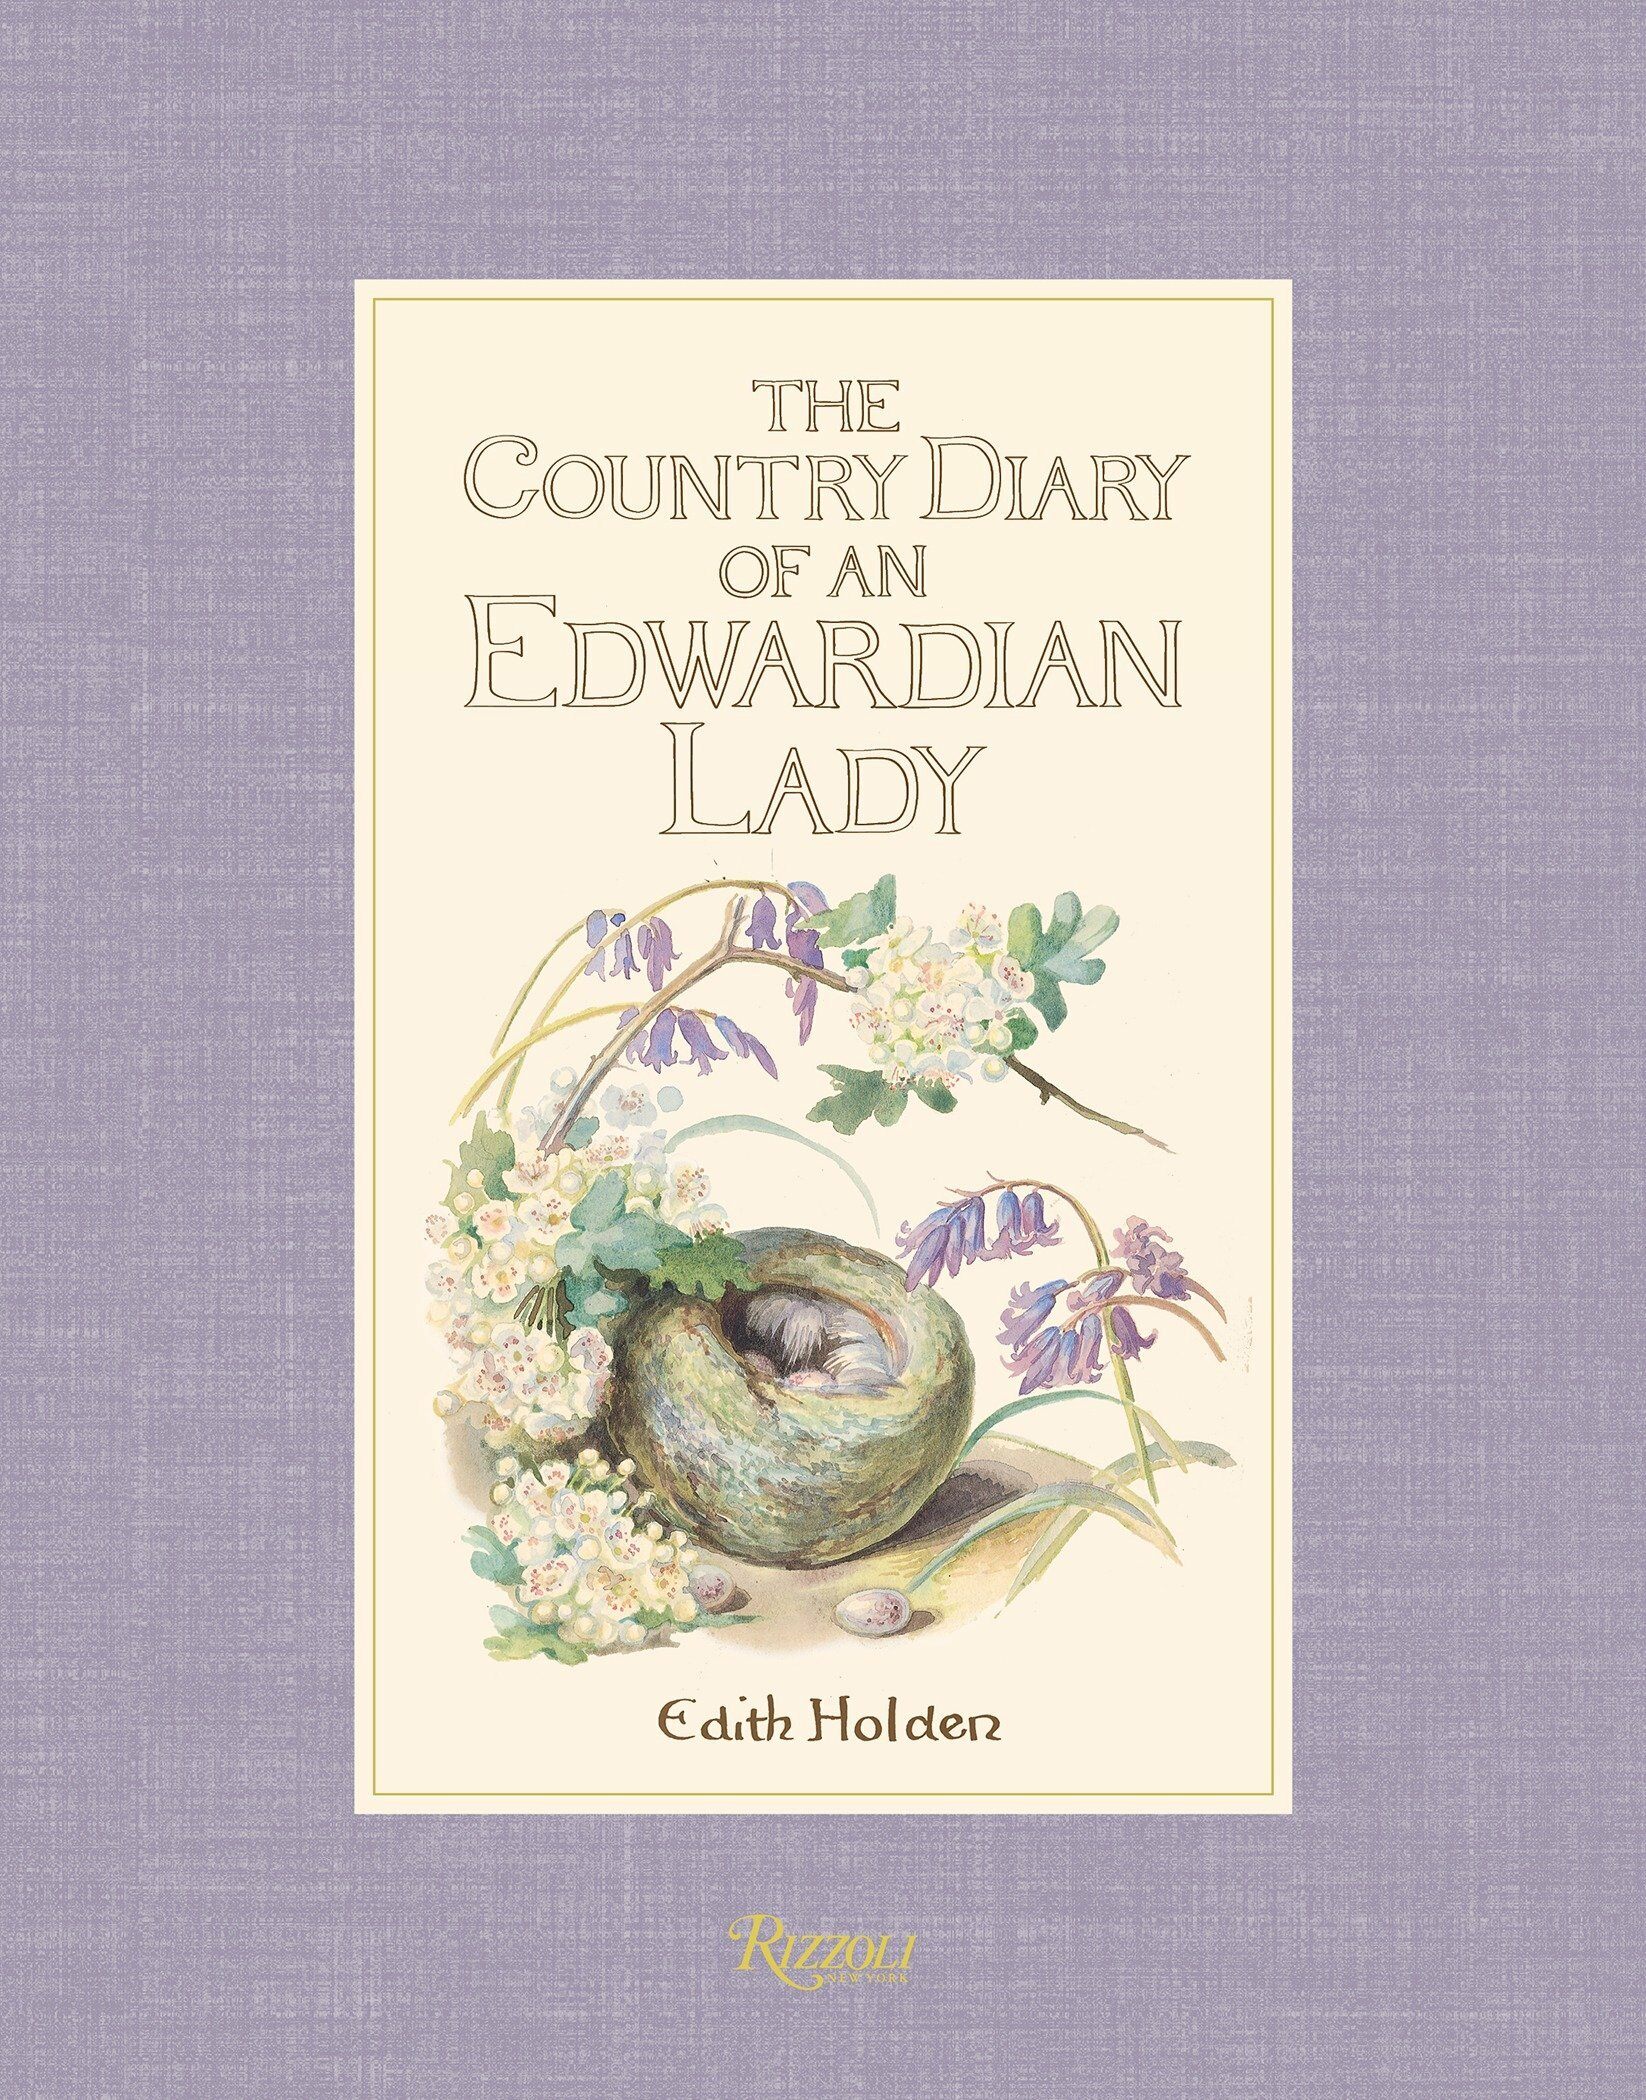 The Country Diary of an Edwardian Lady (Hardcover)